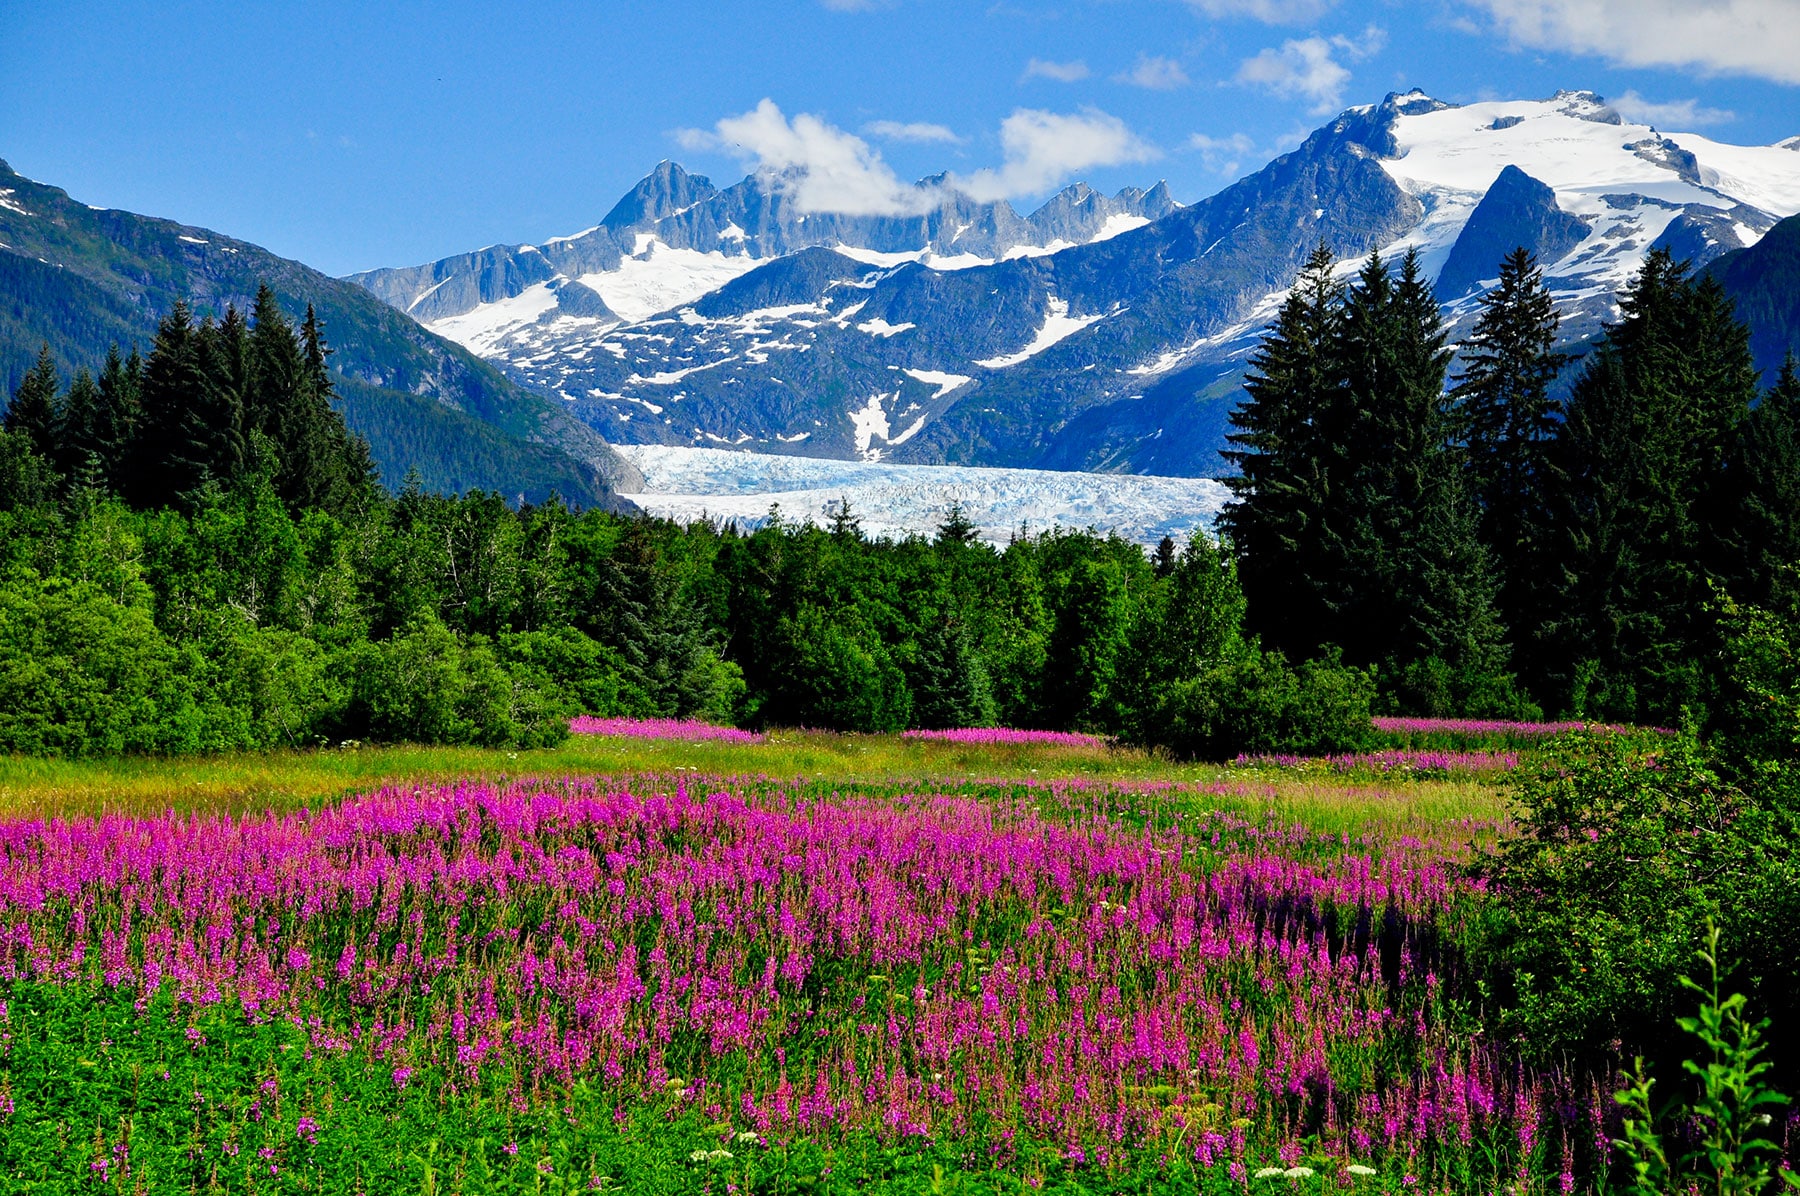 Field of fireweed and mountain views in Alaska